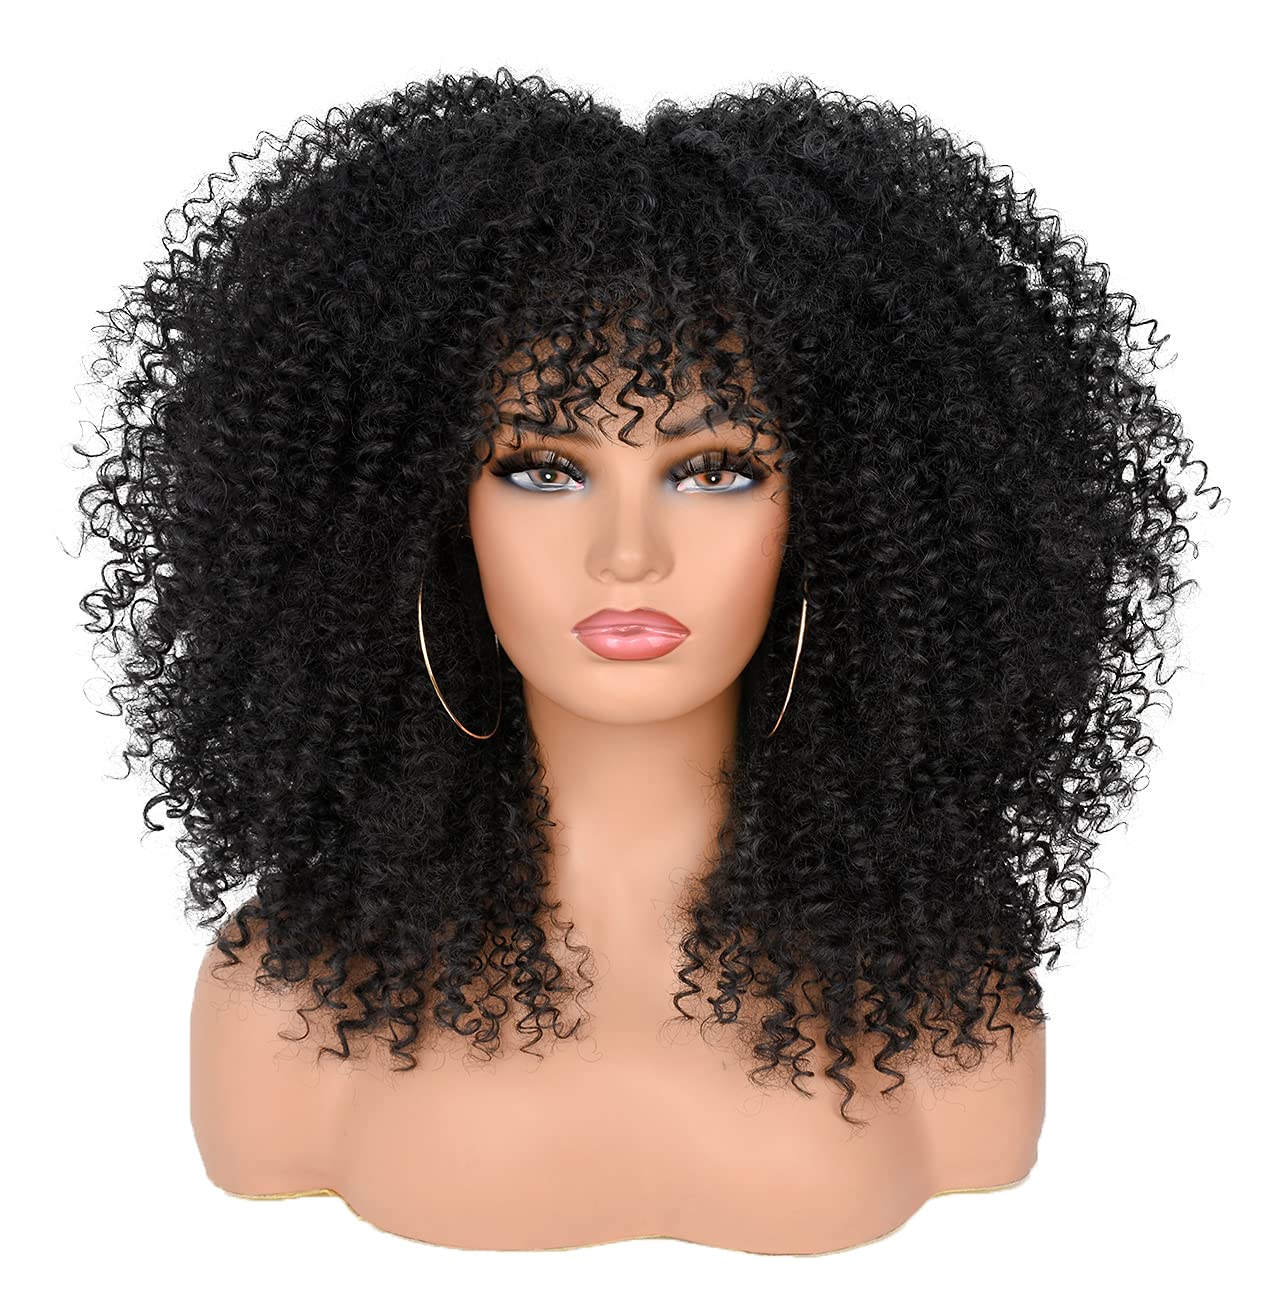 6Inch Curly Wigs for Black Women Black to Brown Afro Bomb Curly Wig with Bangs Synthetic Fiber Glueless Long Kinky Curly Hair